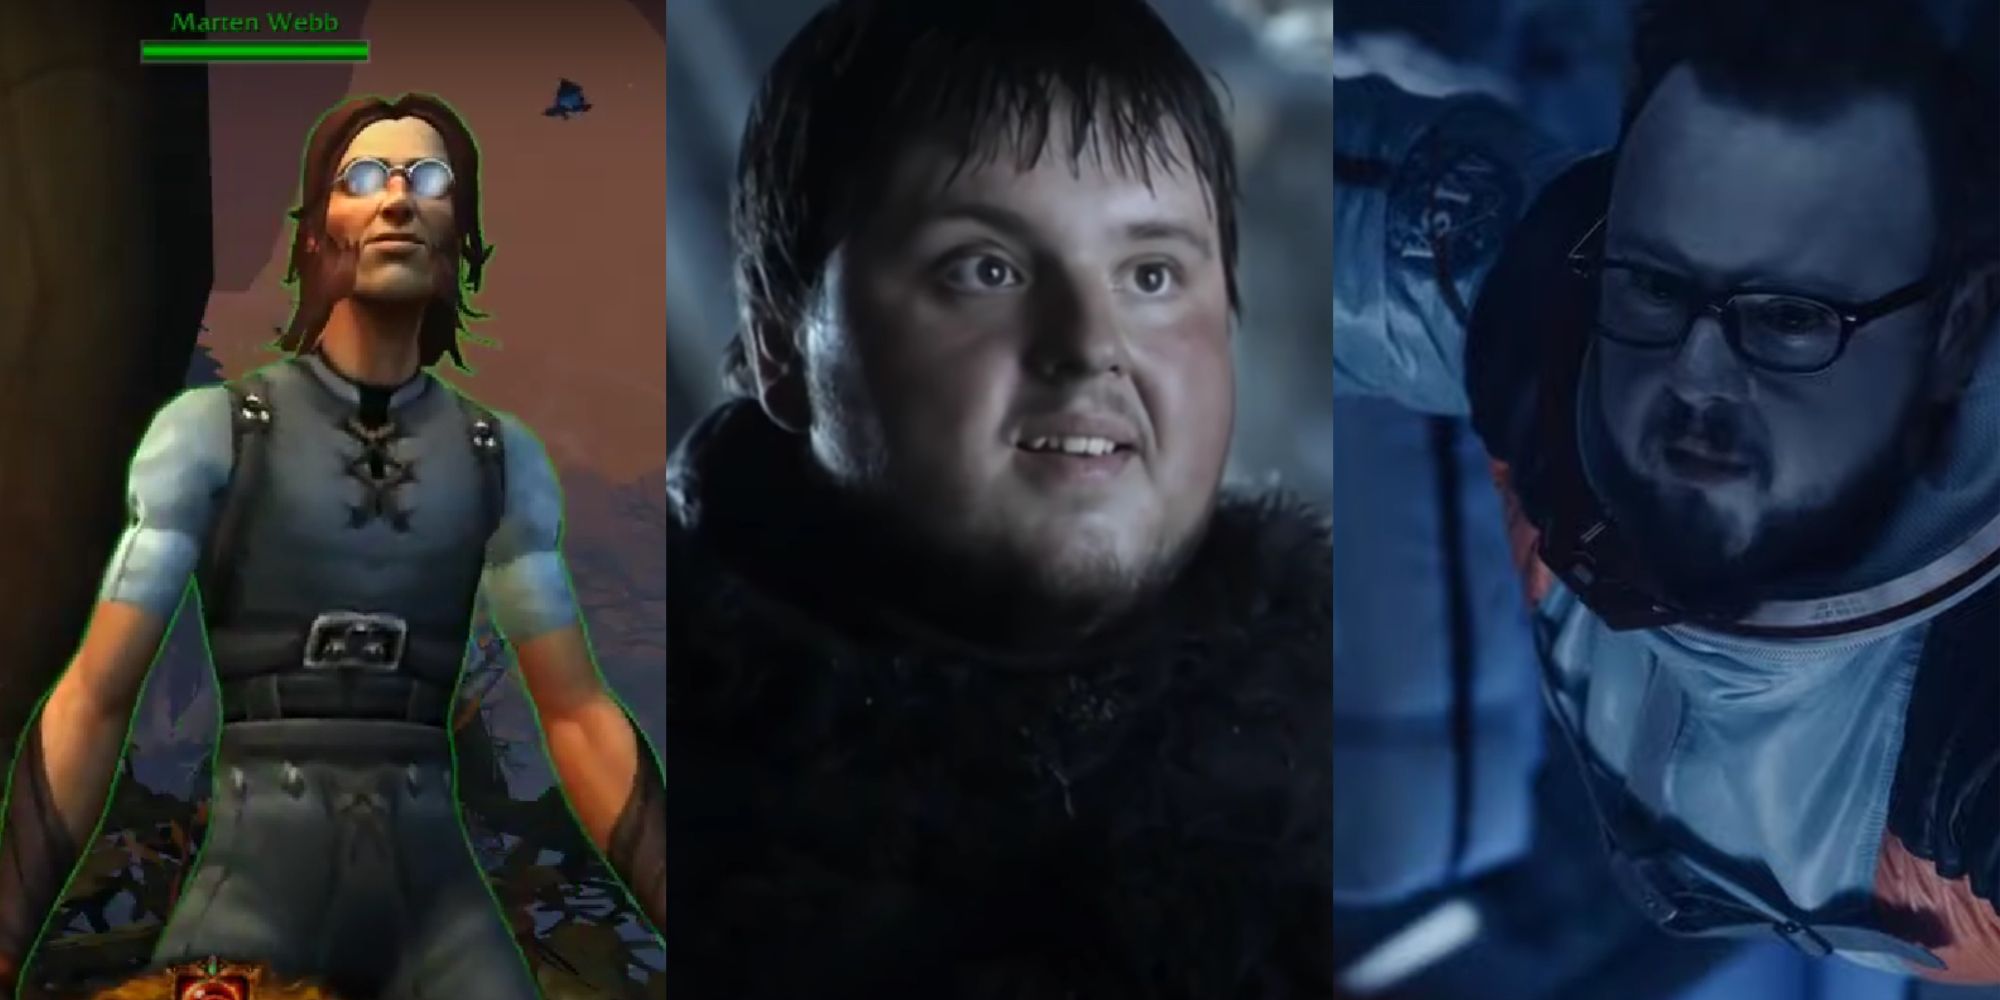 A split image collage of a close-up of John Bradley's Marten Webb character in Warcraft, Samwell Tarly in Game of Thrones, as well as KC in Moonfall.